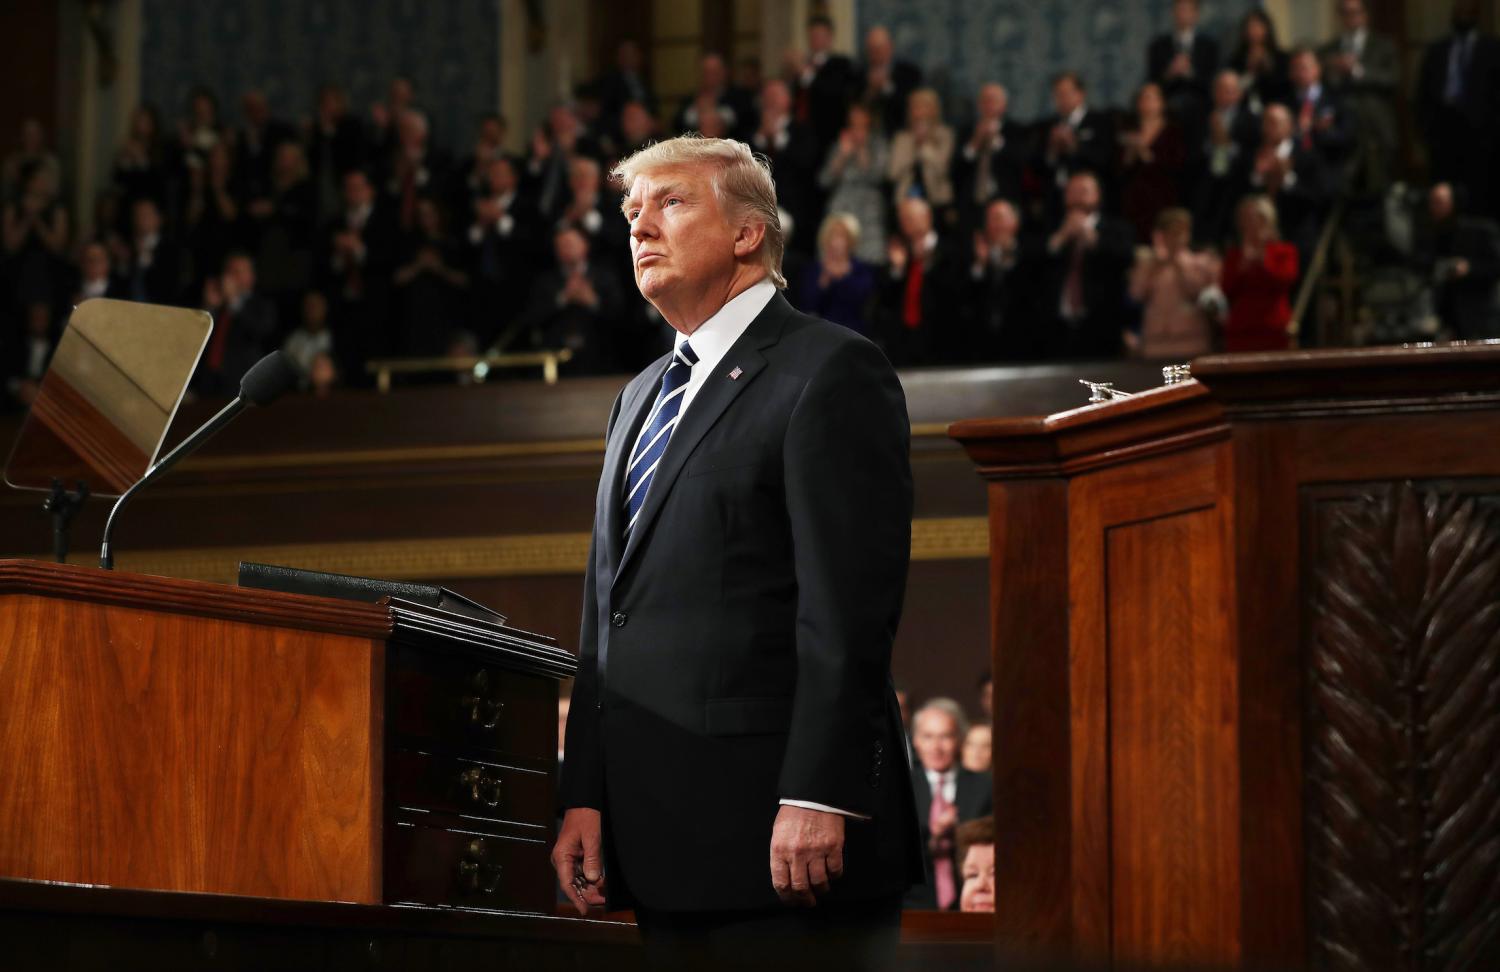 U.S. President Donald Trump delivers his first address to a joint session of Congress from the floor of the House of Representatives iin Washington, U.S., February 28, 2017. REUTERS/Jim Lo Scalzo/Pool - RTS10VRR